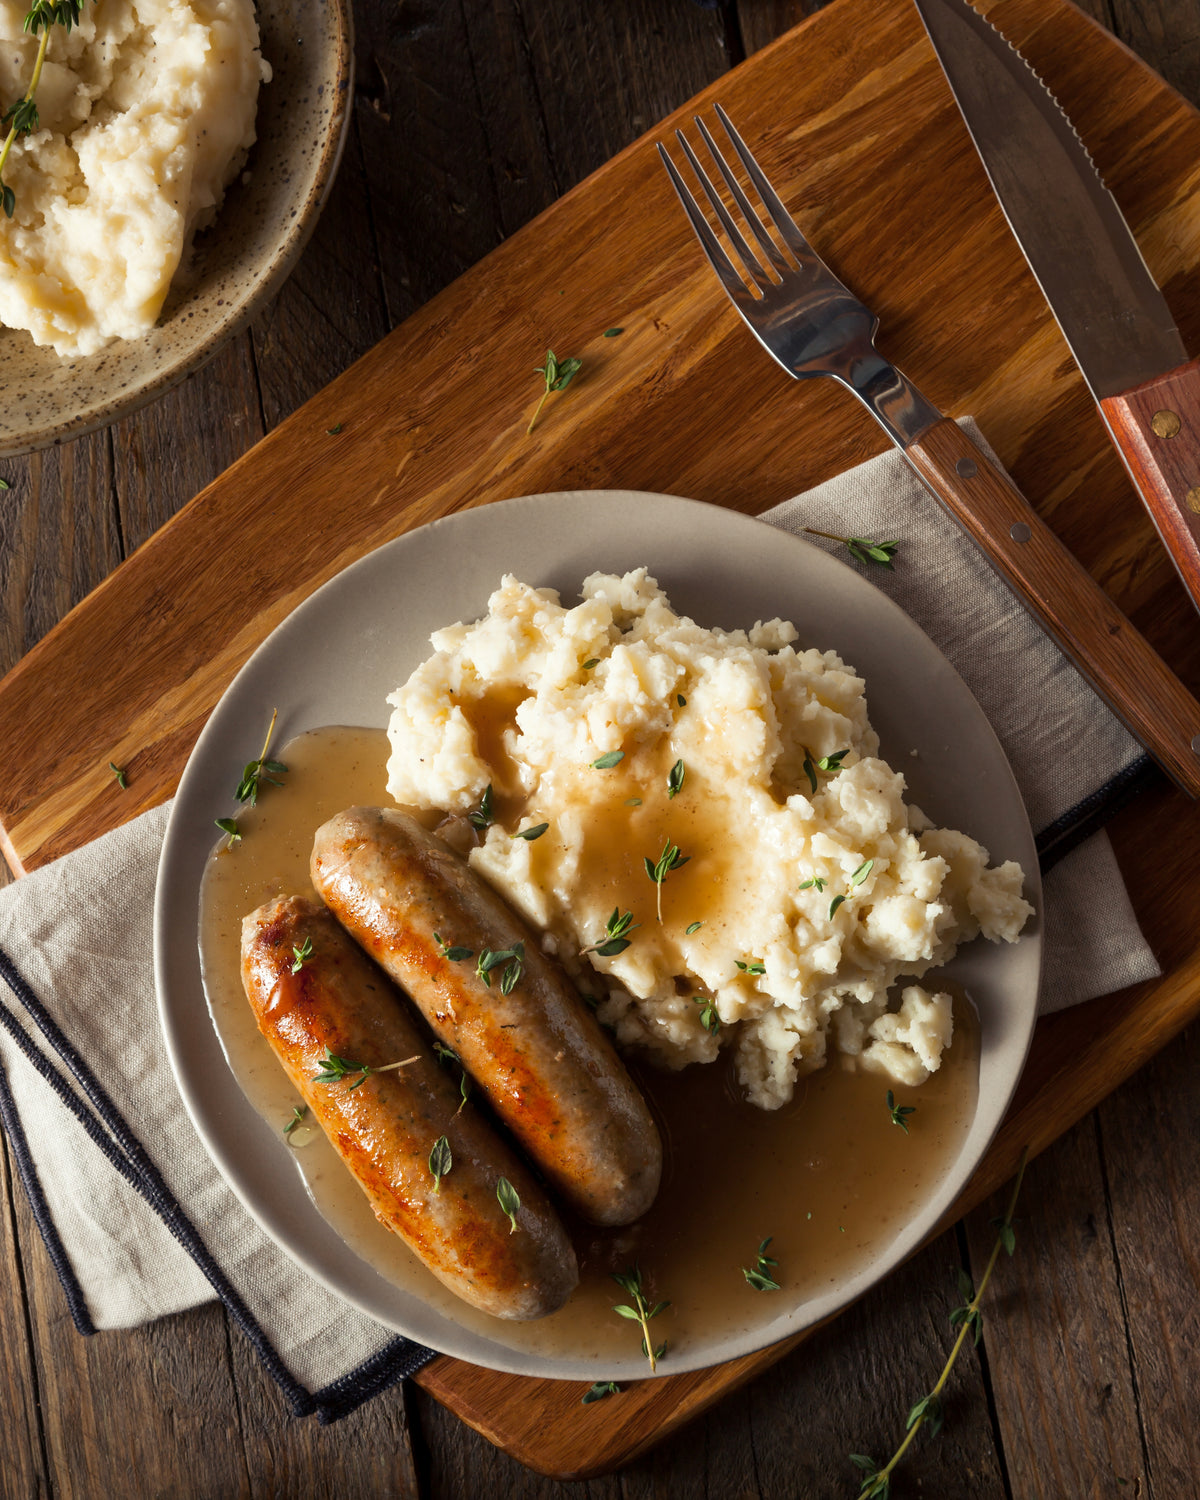 Our Bangers and Mash Recipe